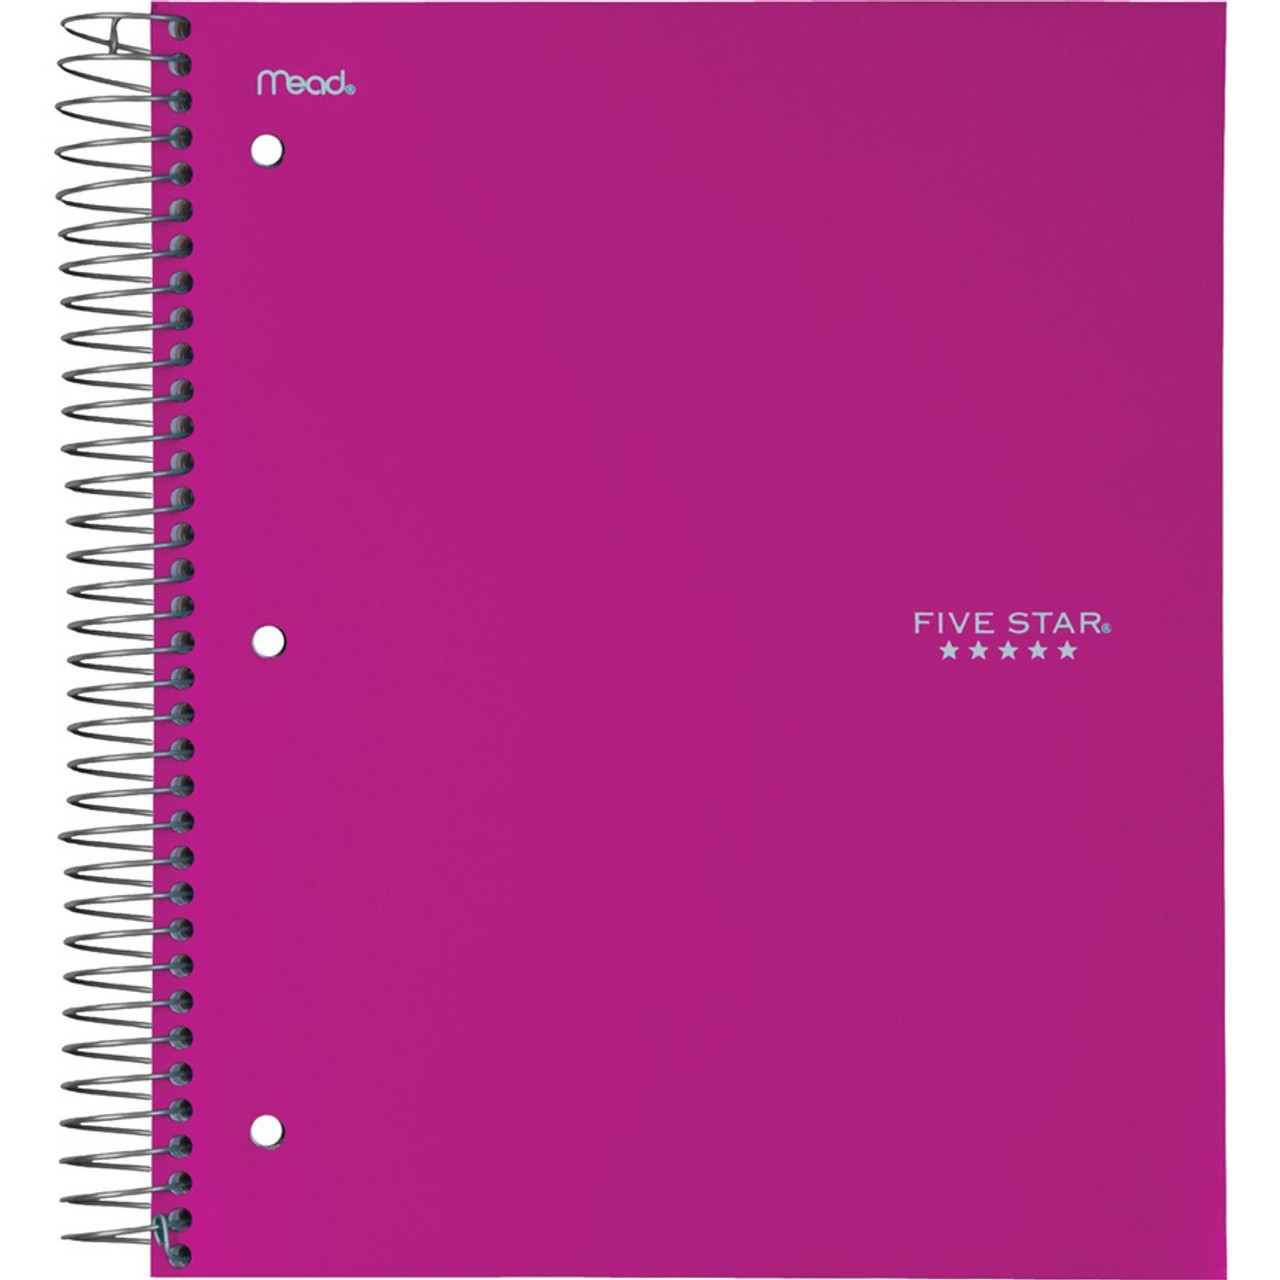 MEA06208 - Mead Five-Star Wirebound 5-Subject Notebook - 200